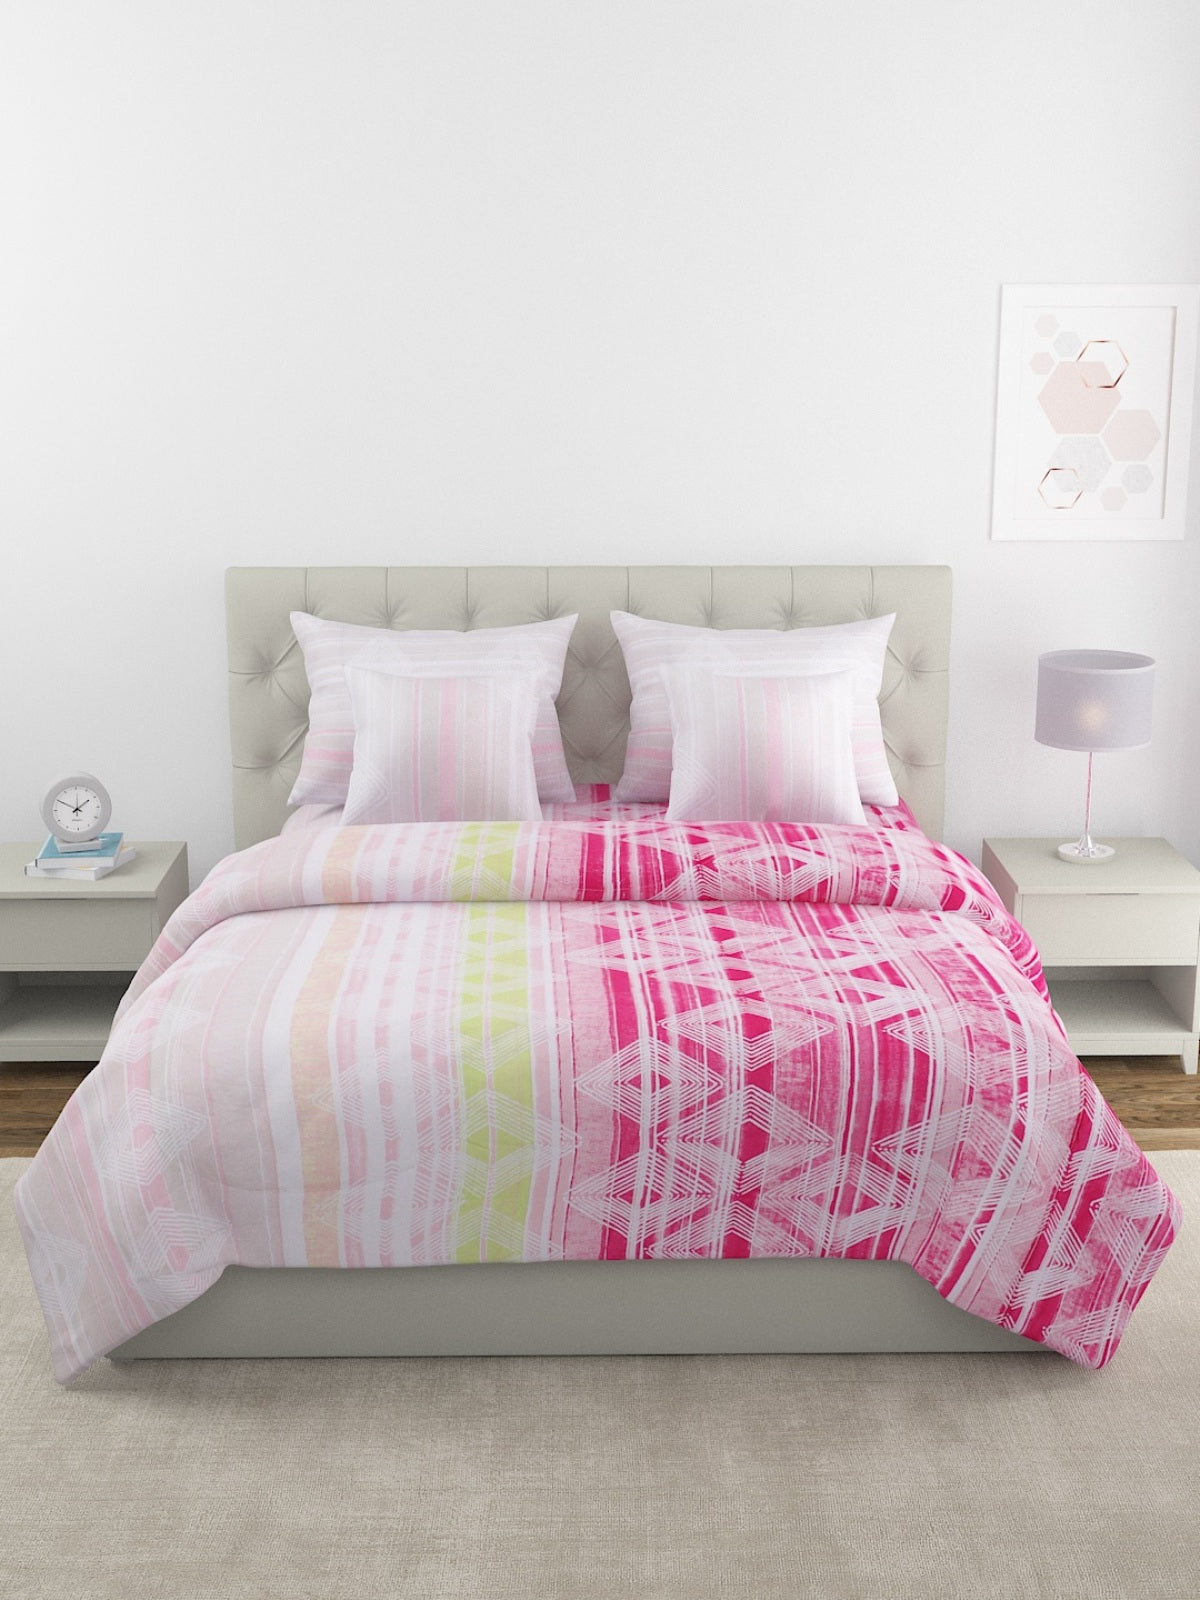 Pink & Peach Bedding Set 1 Bedsheet with 2 Pillow Covers , 1 Quilt/Blanket